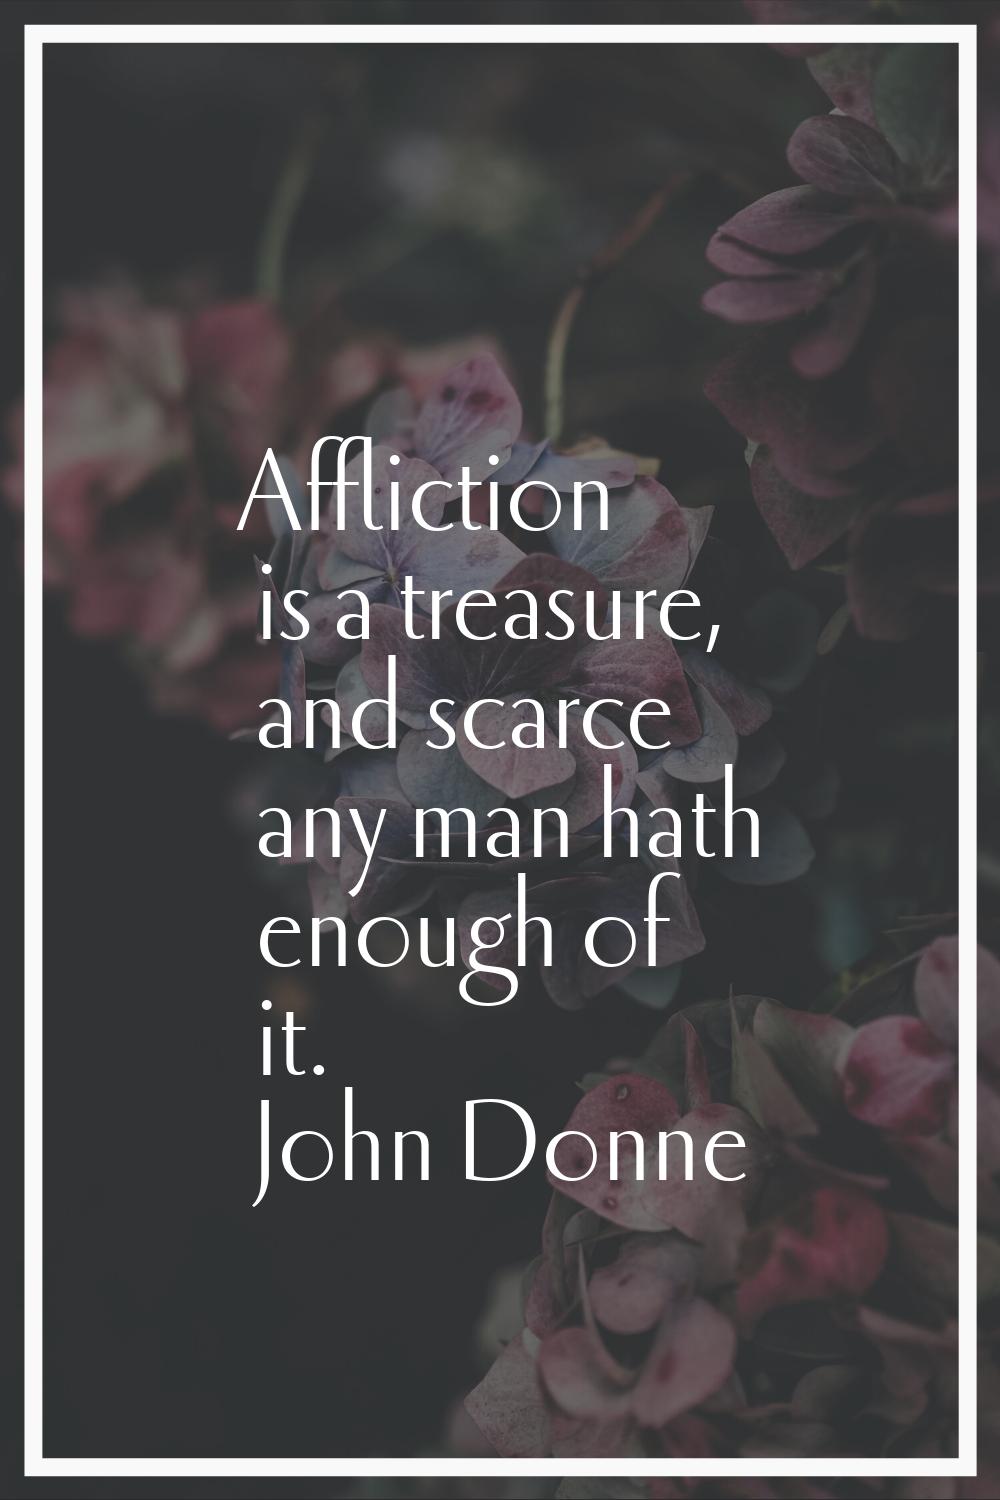 Affliction is a treasure, and scarce any man hath enough of it.